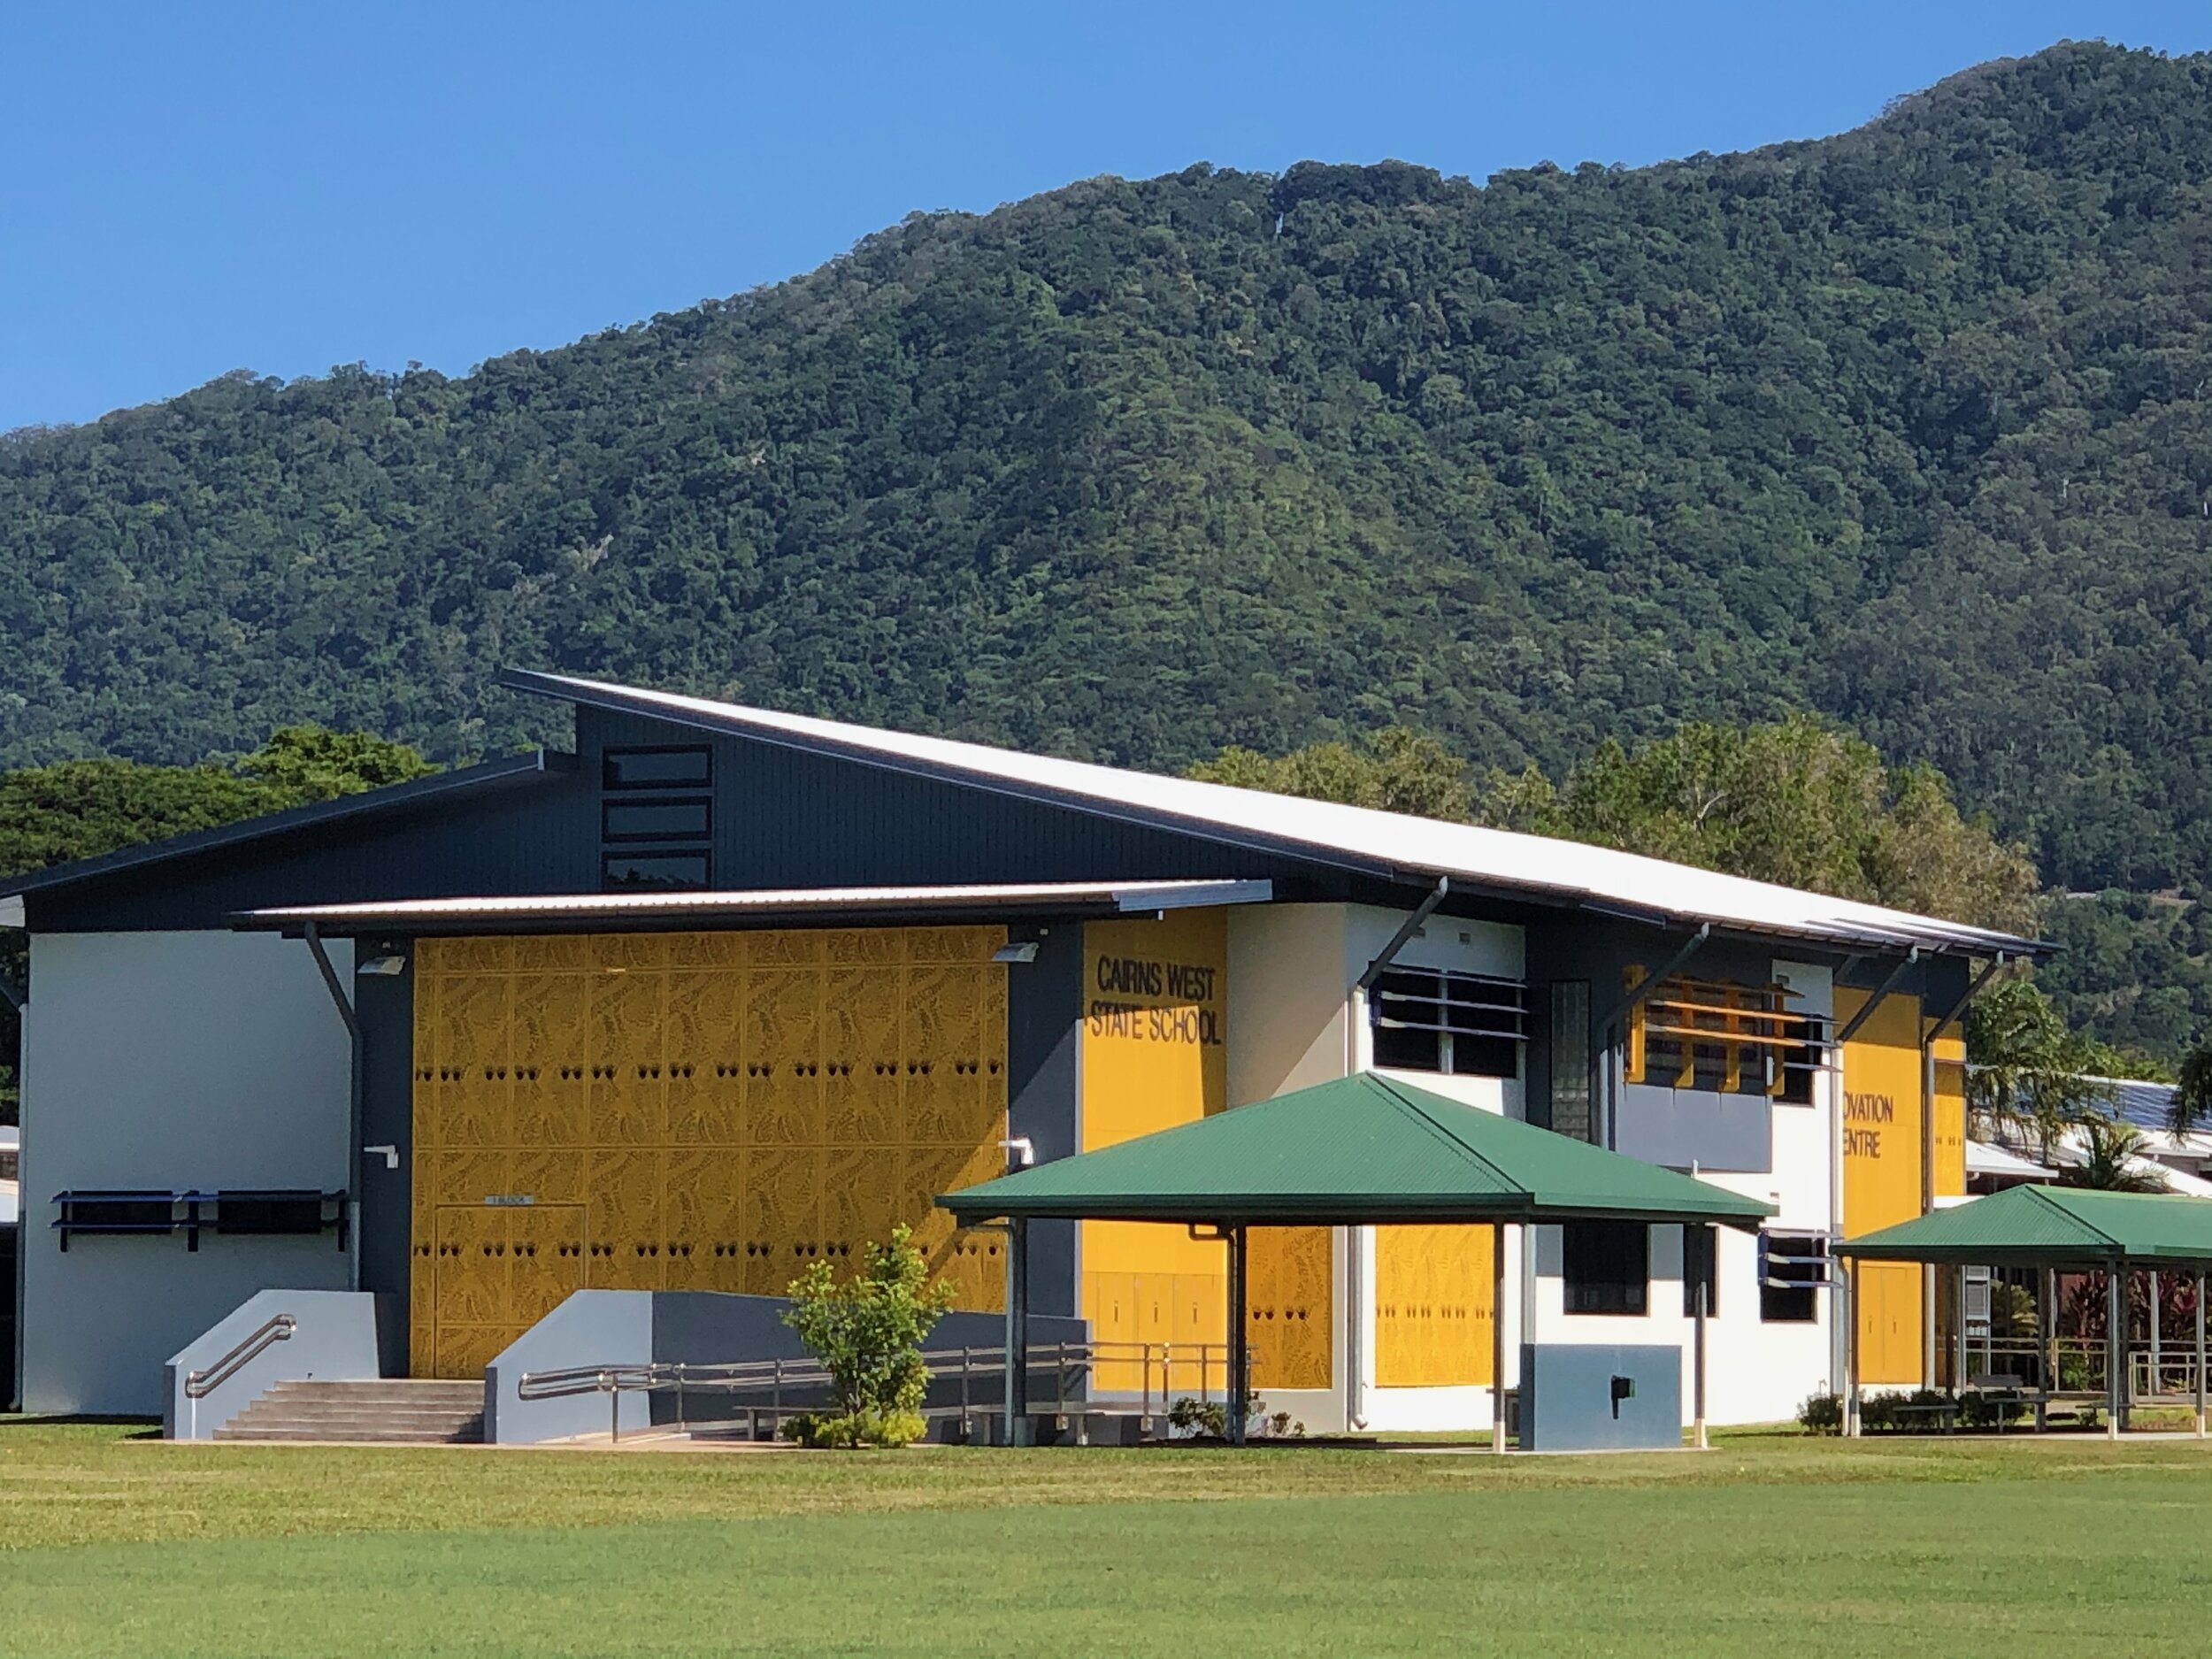 Cairns West State School